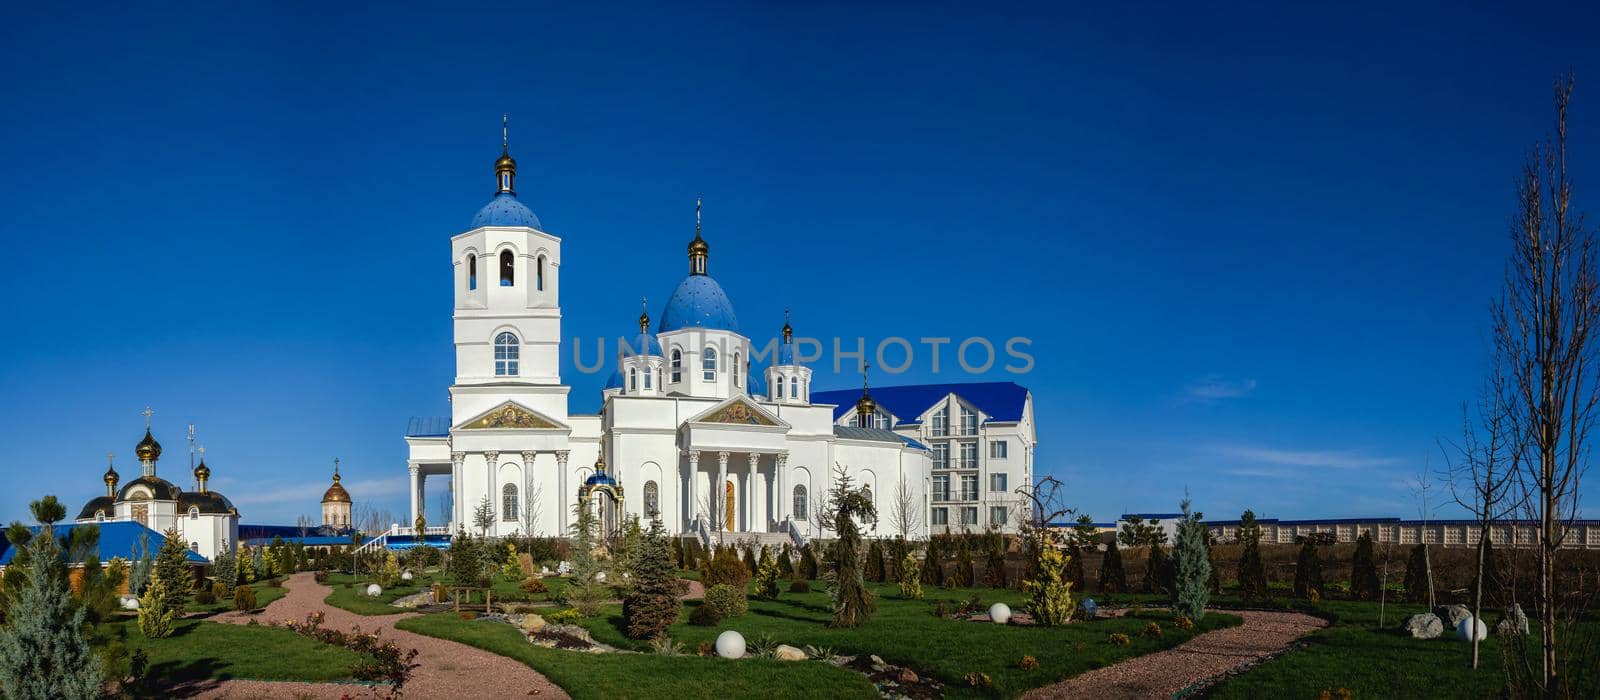 Marinovka village, Ukraine 02.01.2021. Holy Protection Skete of the Holy Dormition Odessa Monastery of the Odessa Diocese of the Ukrainian Orthodox Church on a sunny winter day